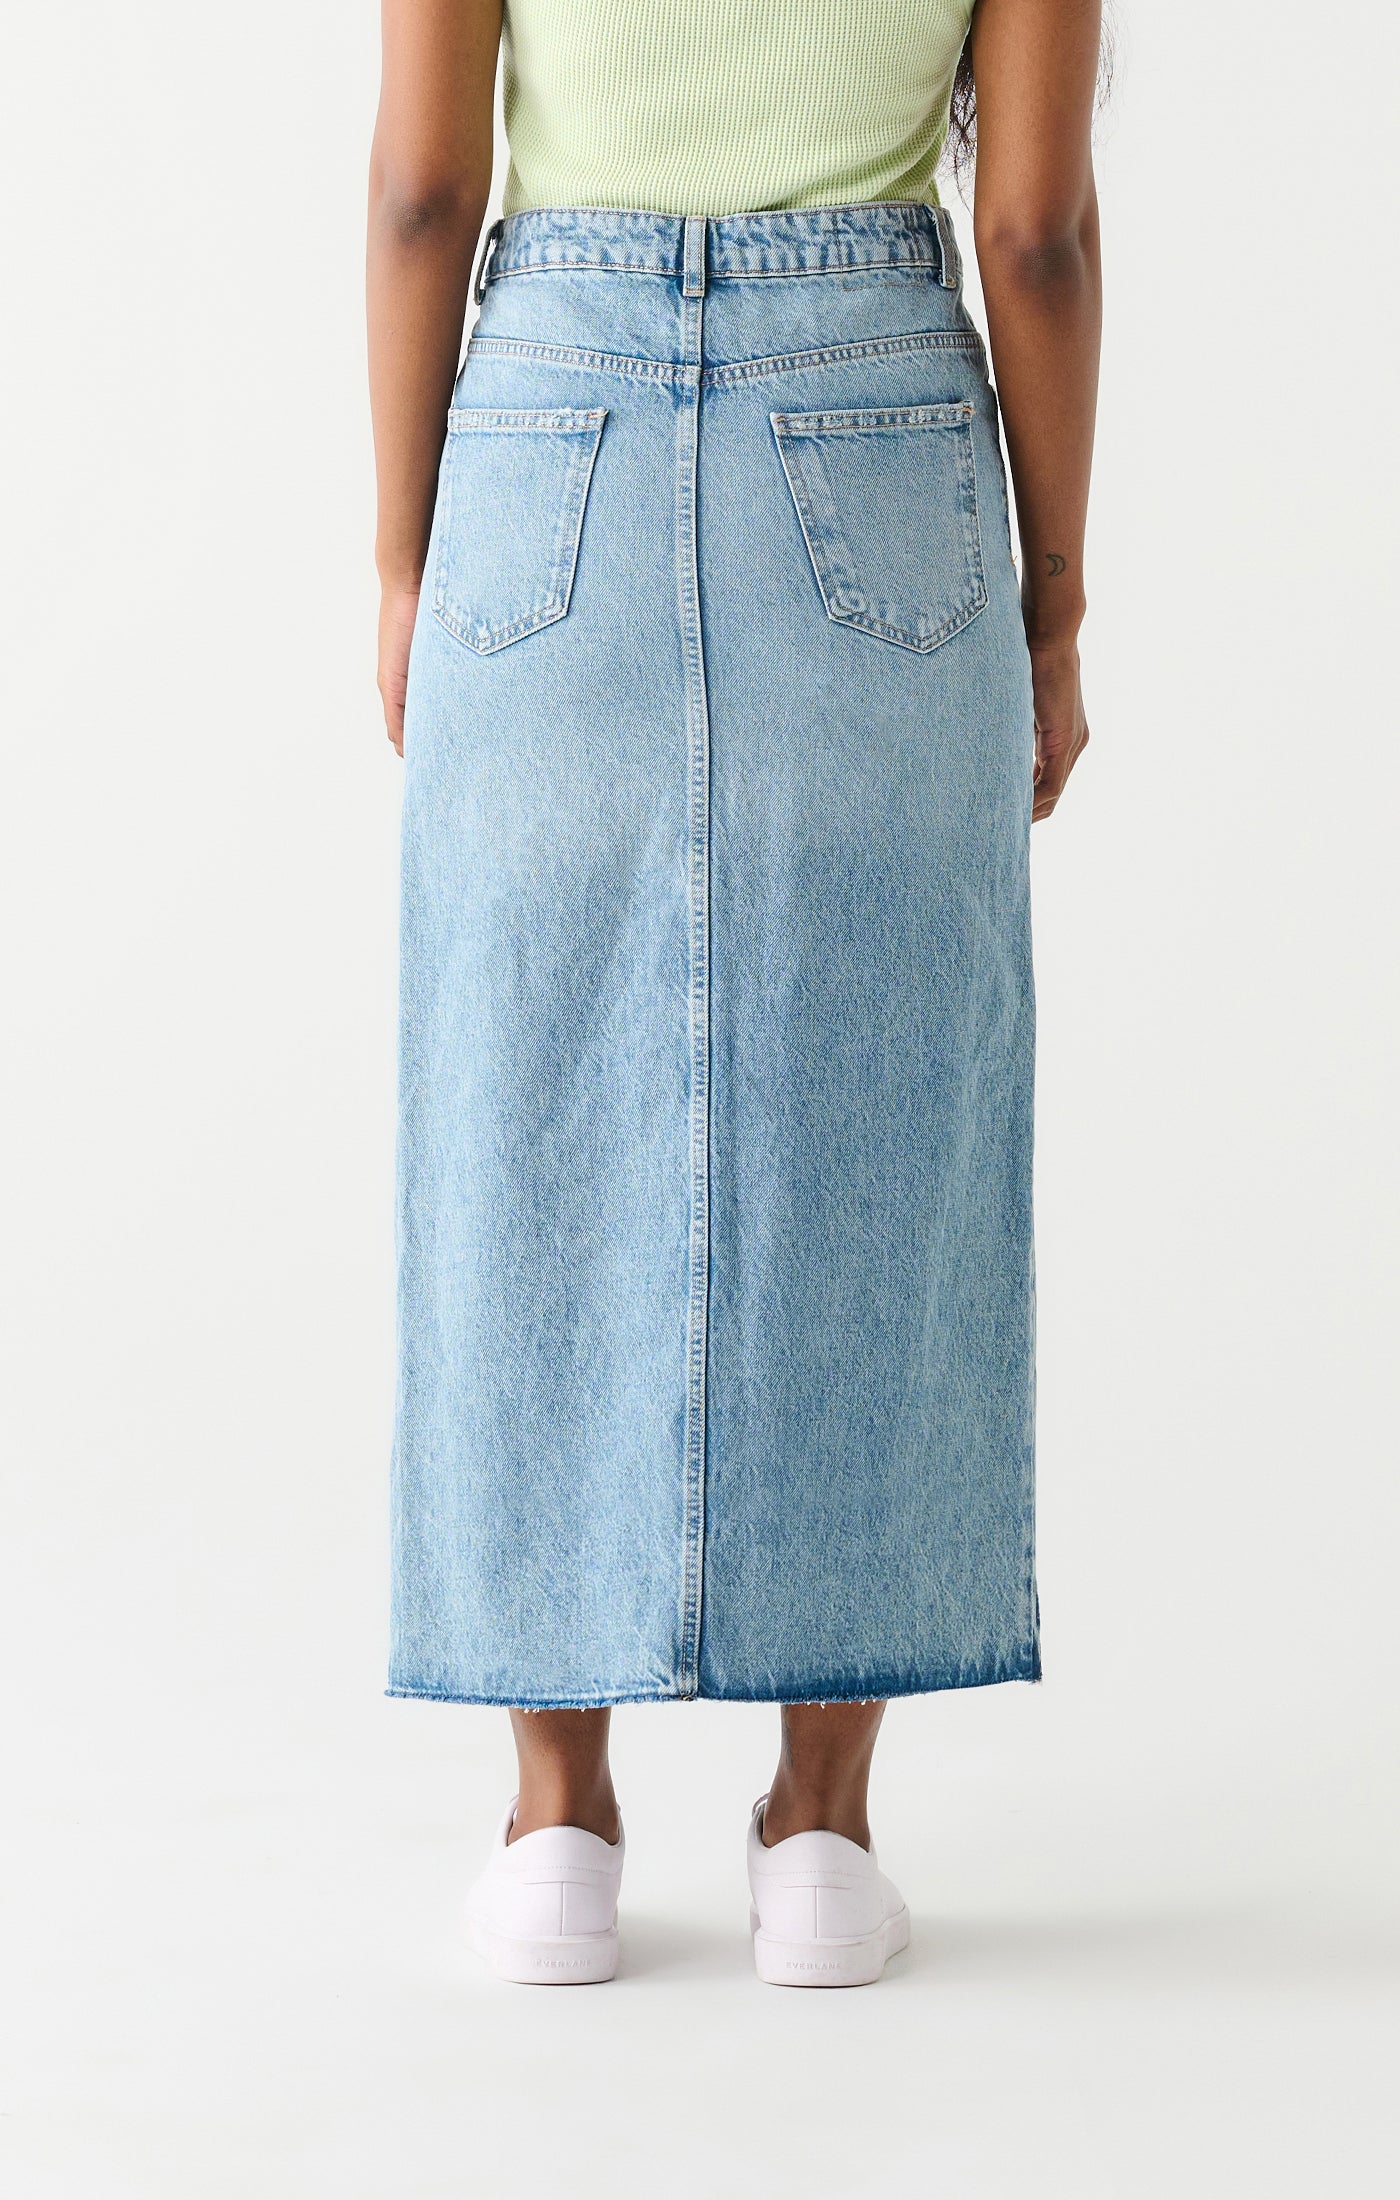 Denim Skirt - Out of the Blue